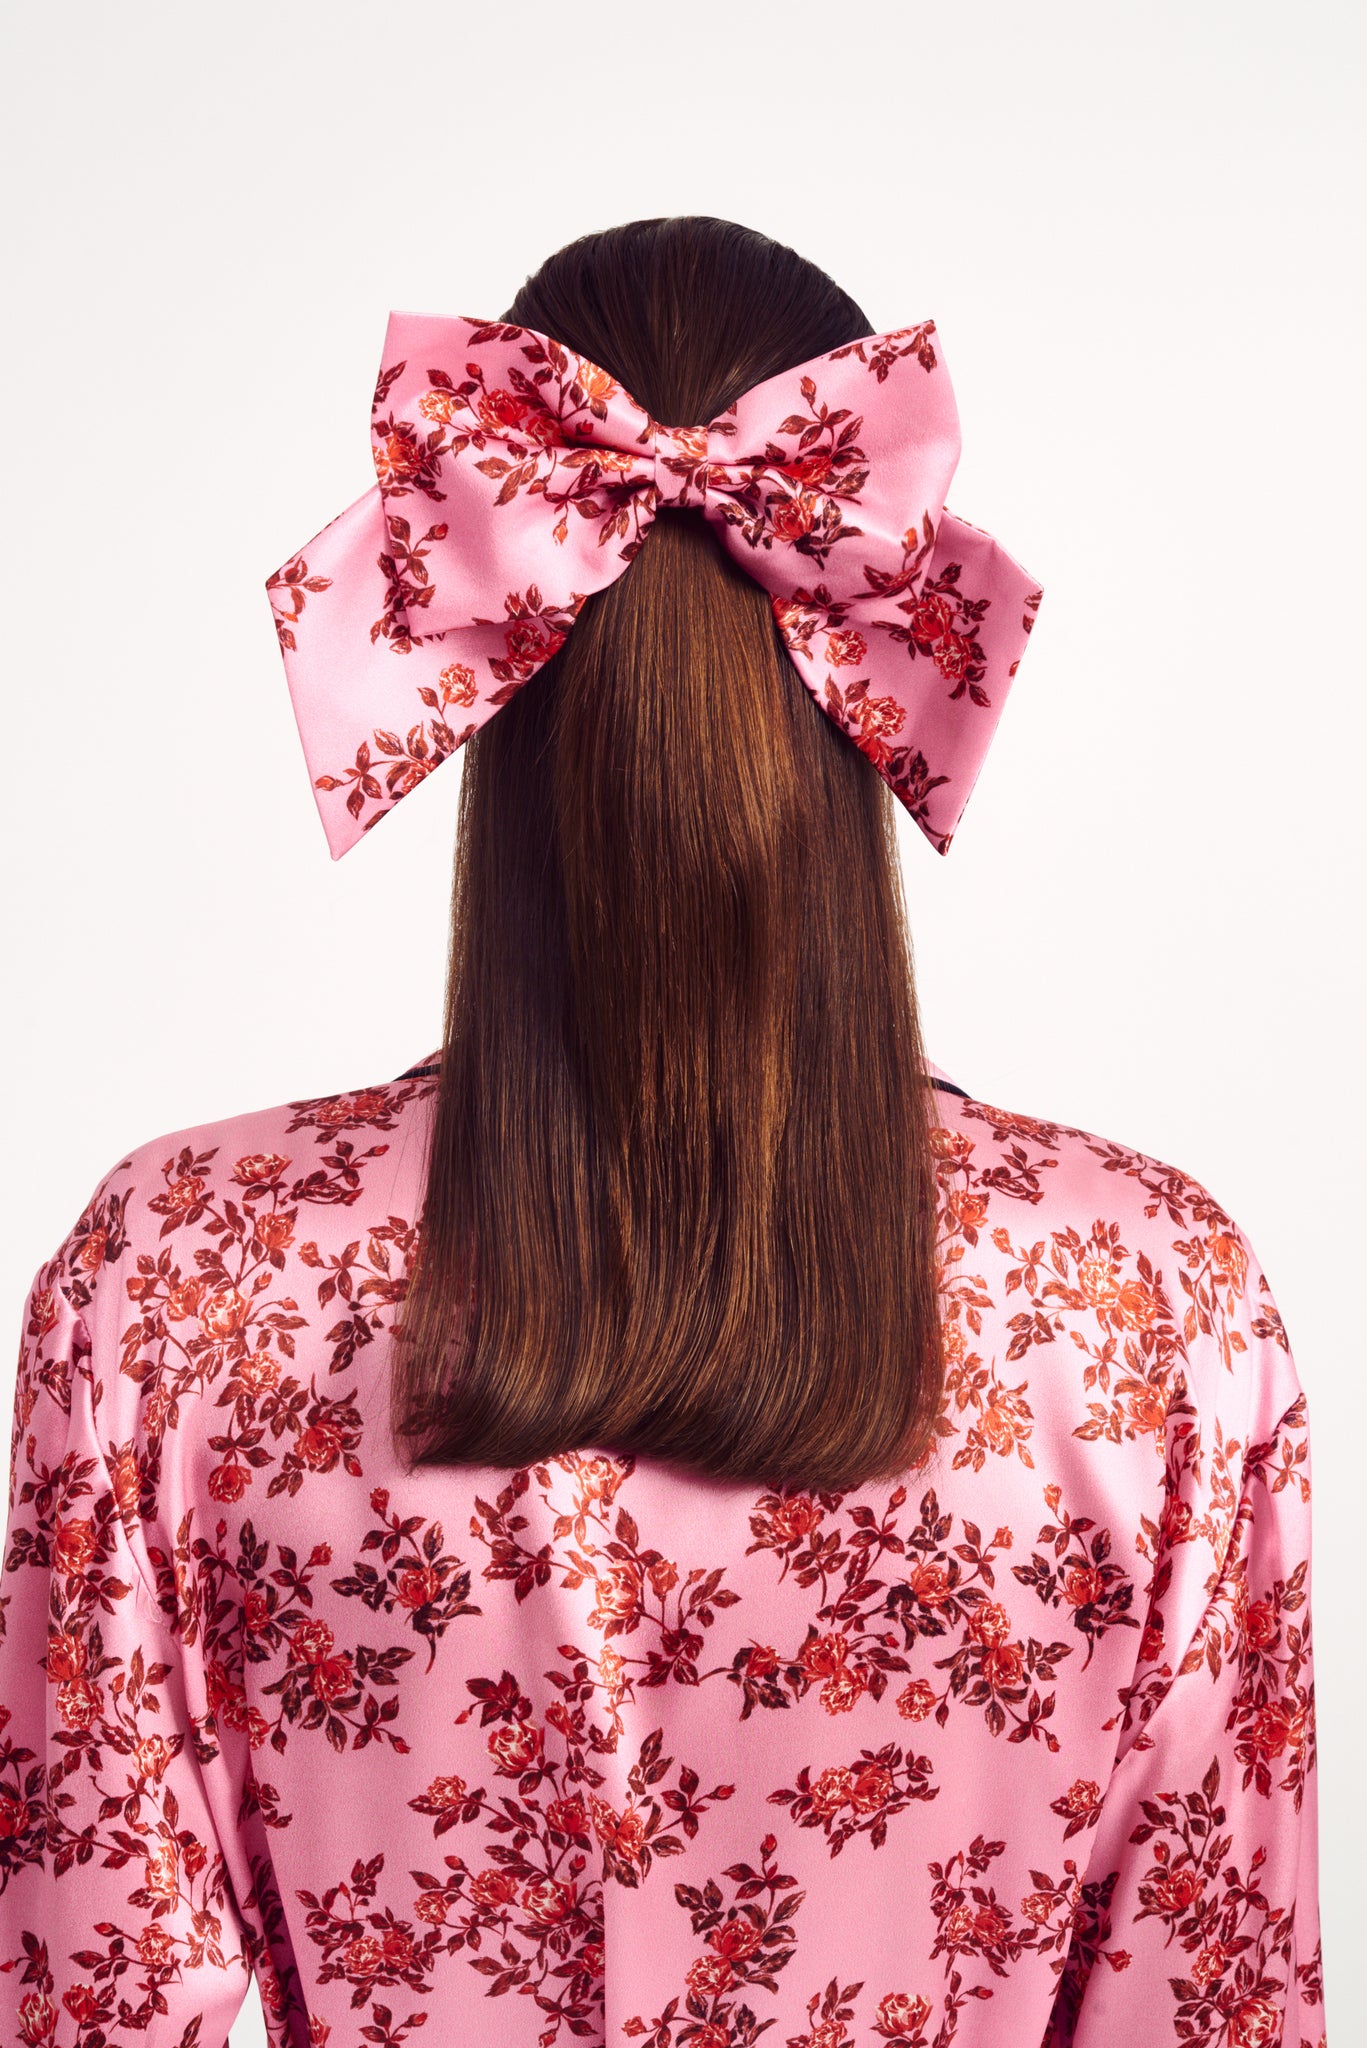 Mayfair Bow in Red Rose Floral Print on Pink Silk Satin | Emilia Wickstead